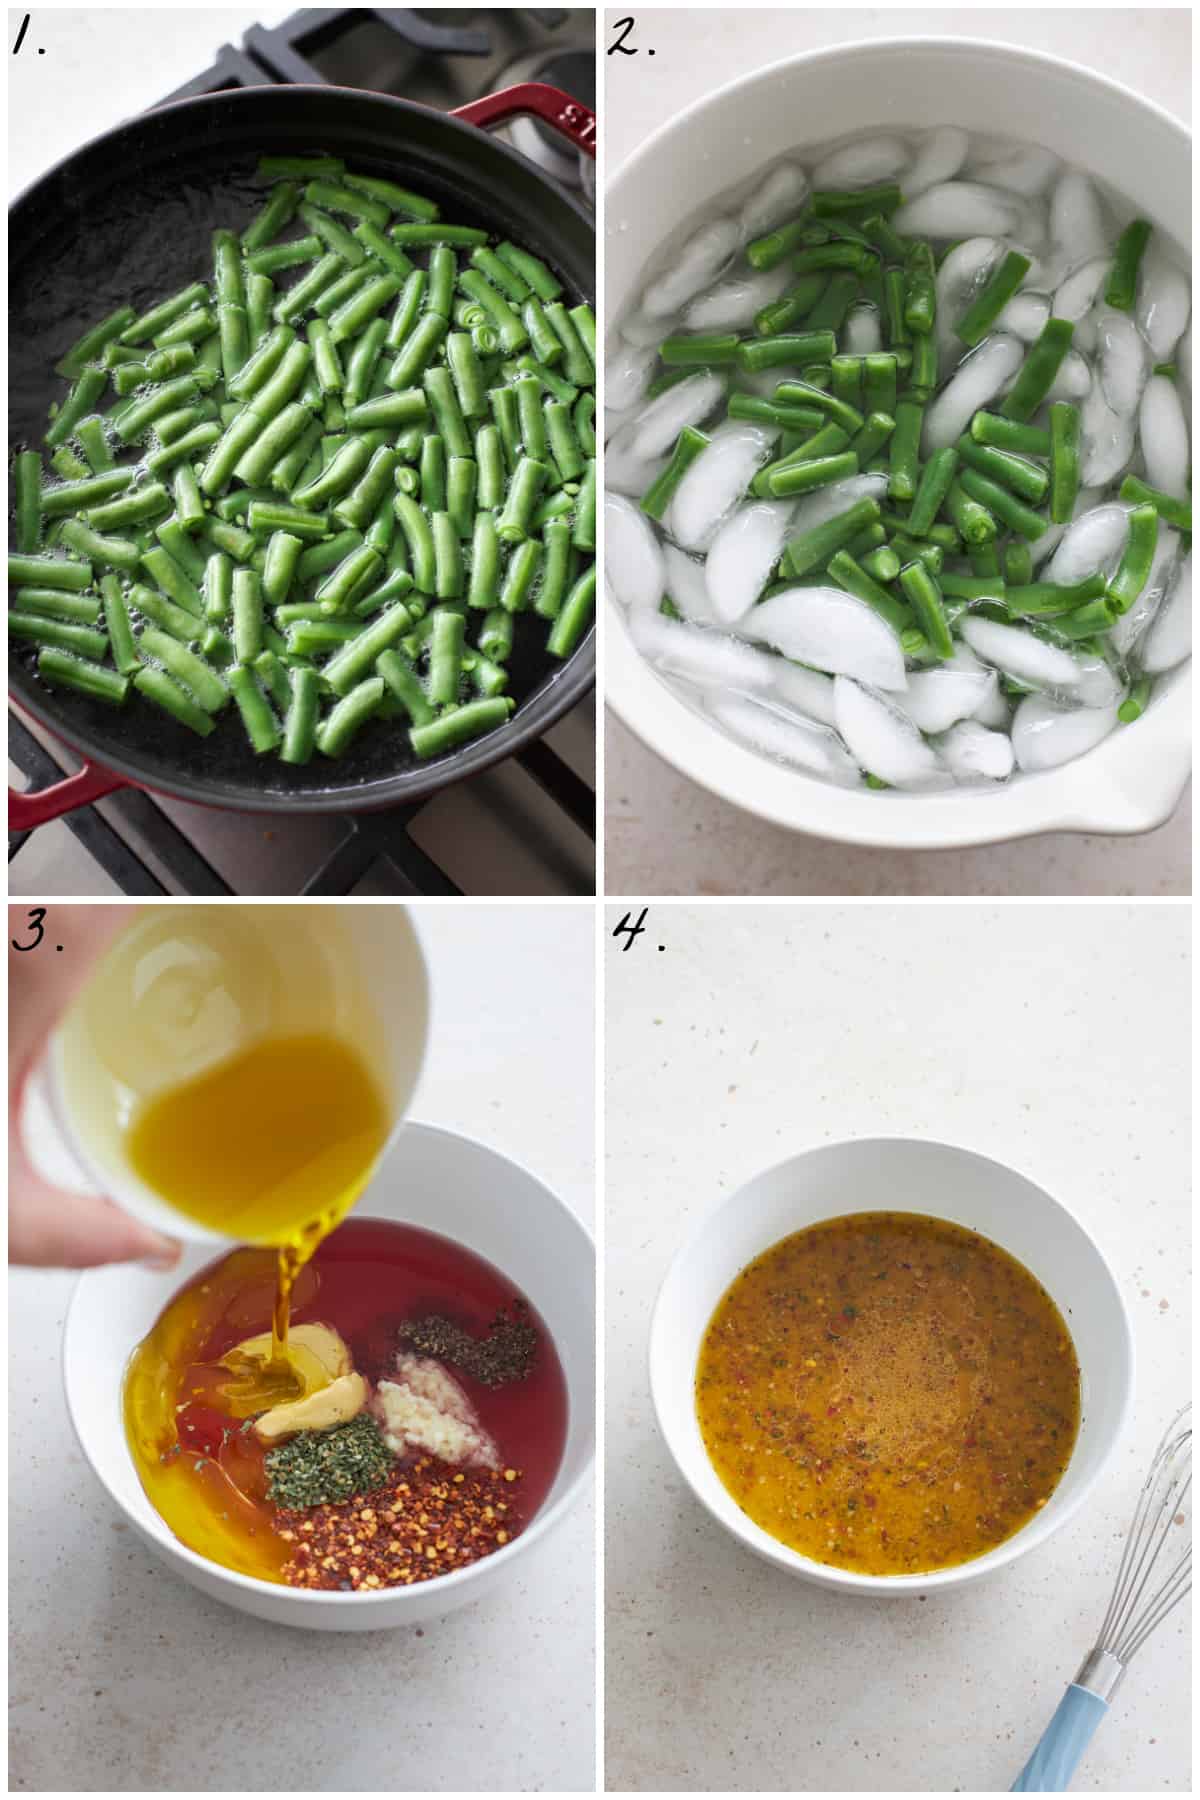 Four process photos showing green beans boiling then put into ice and how to whisk the dressing. 